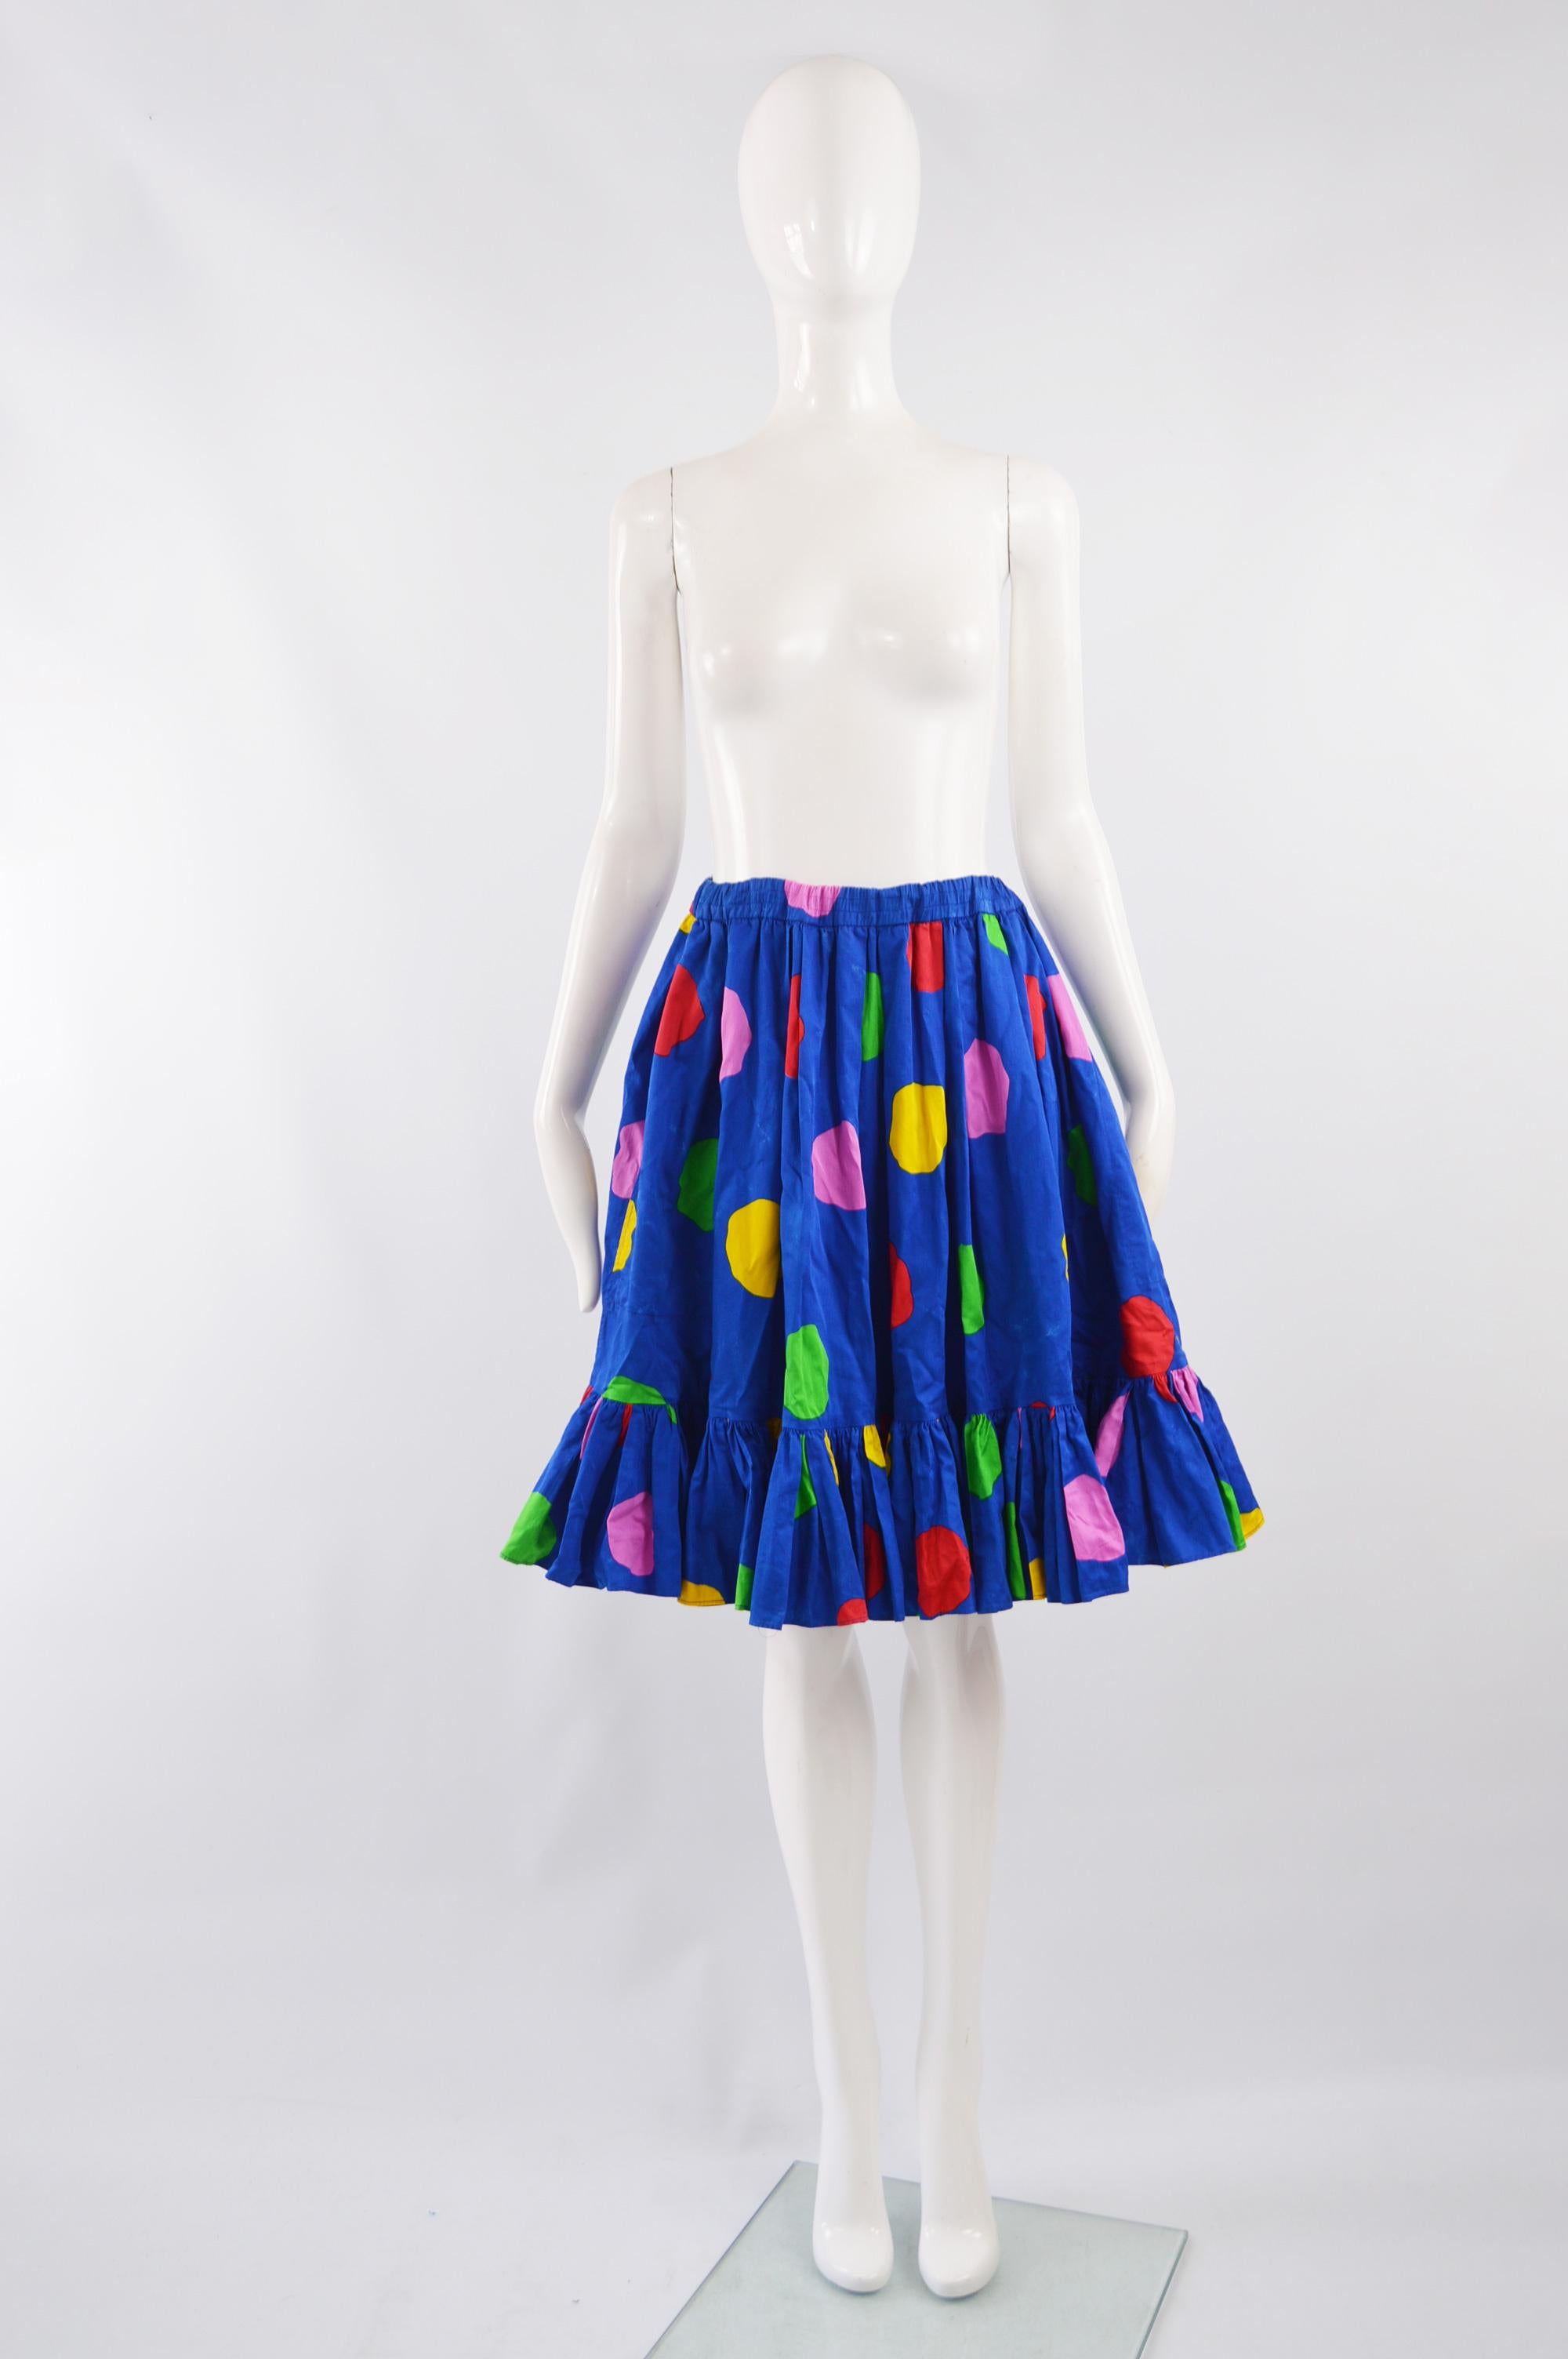 An amazing vintage YSL Rive Gauche skirt from the 80s in a blue cotton with multicolored oversized polka dots throughout. The skirt is full with an elasticated waist and a ruffled flounce to the hem. 

Size: Marked FR 40 which is roughly a UK 12/ US